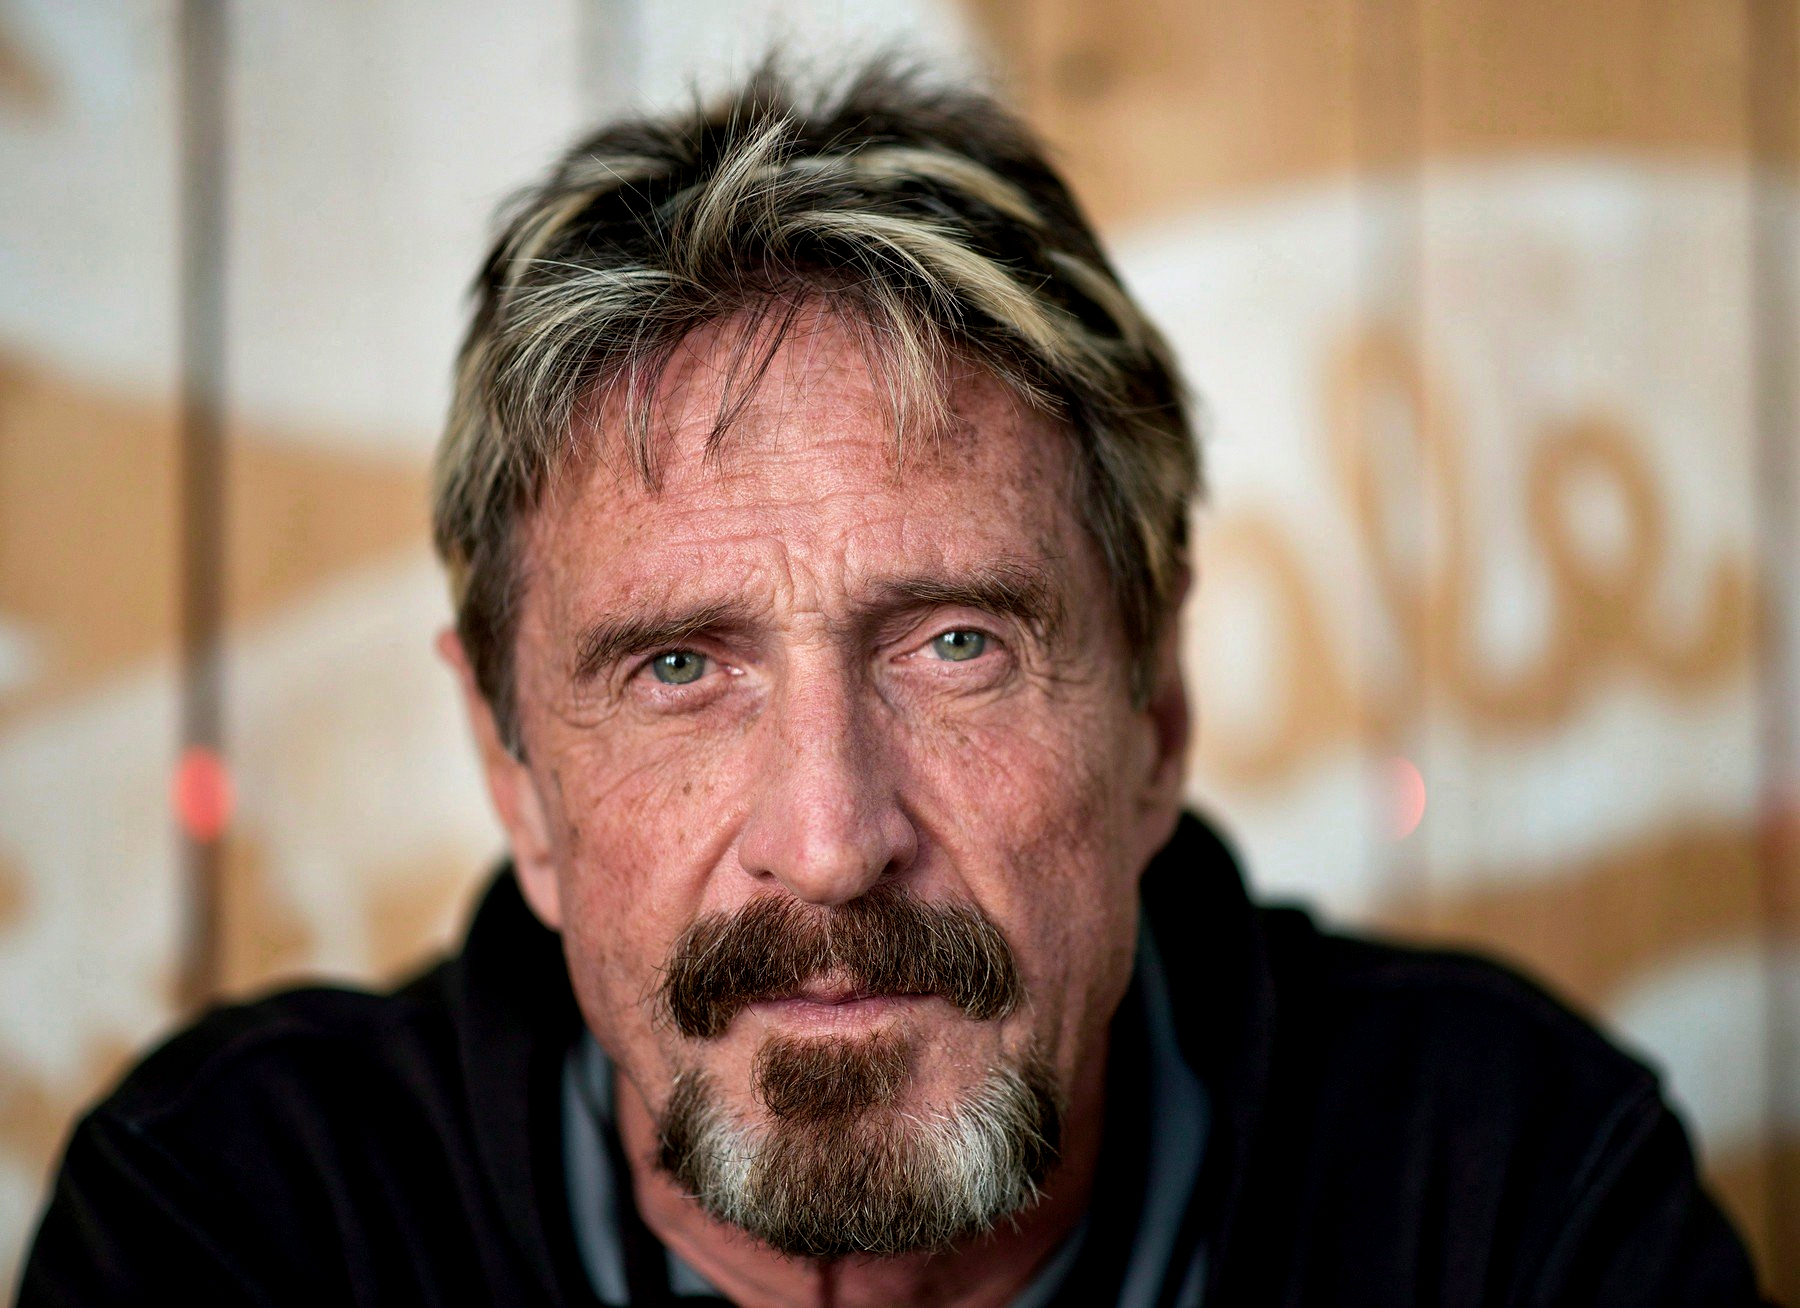 John McAfee is the most important influencer in the crypto industry